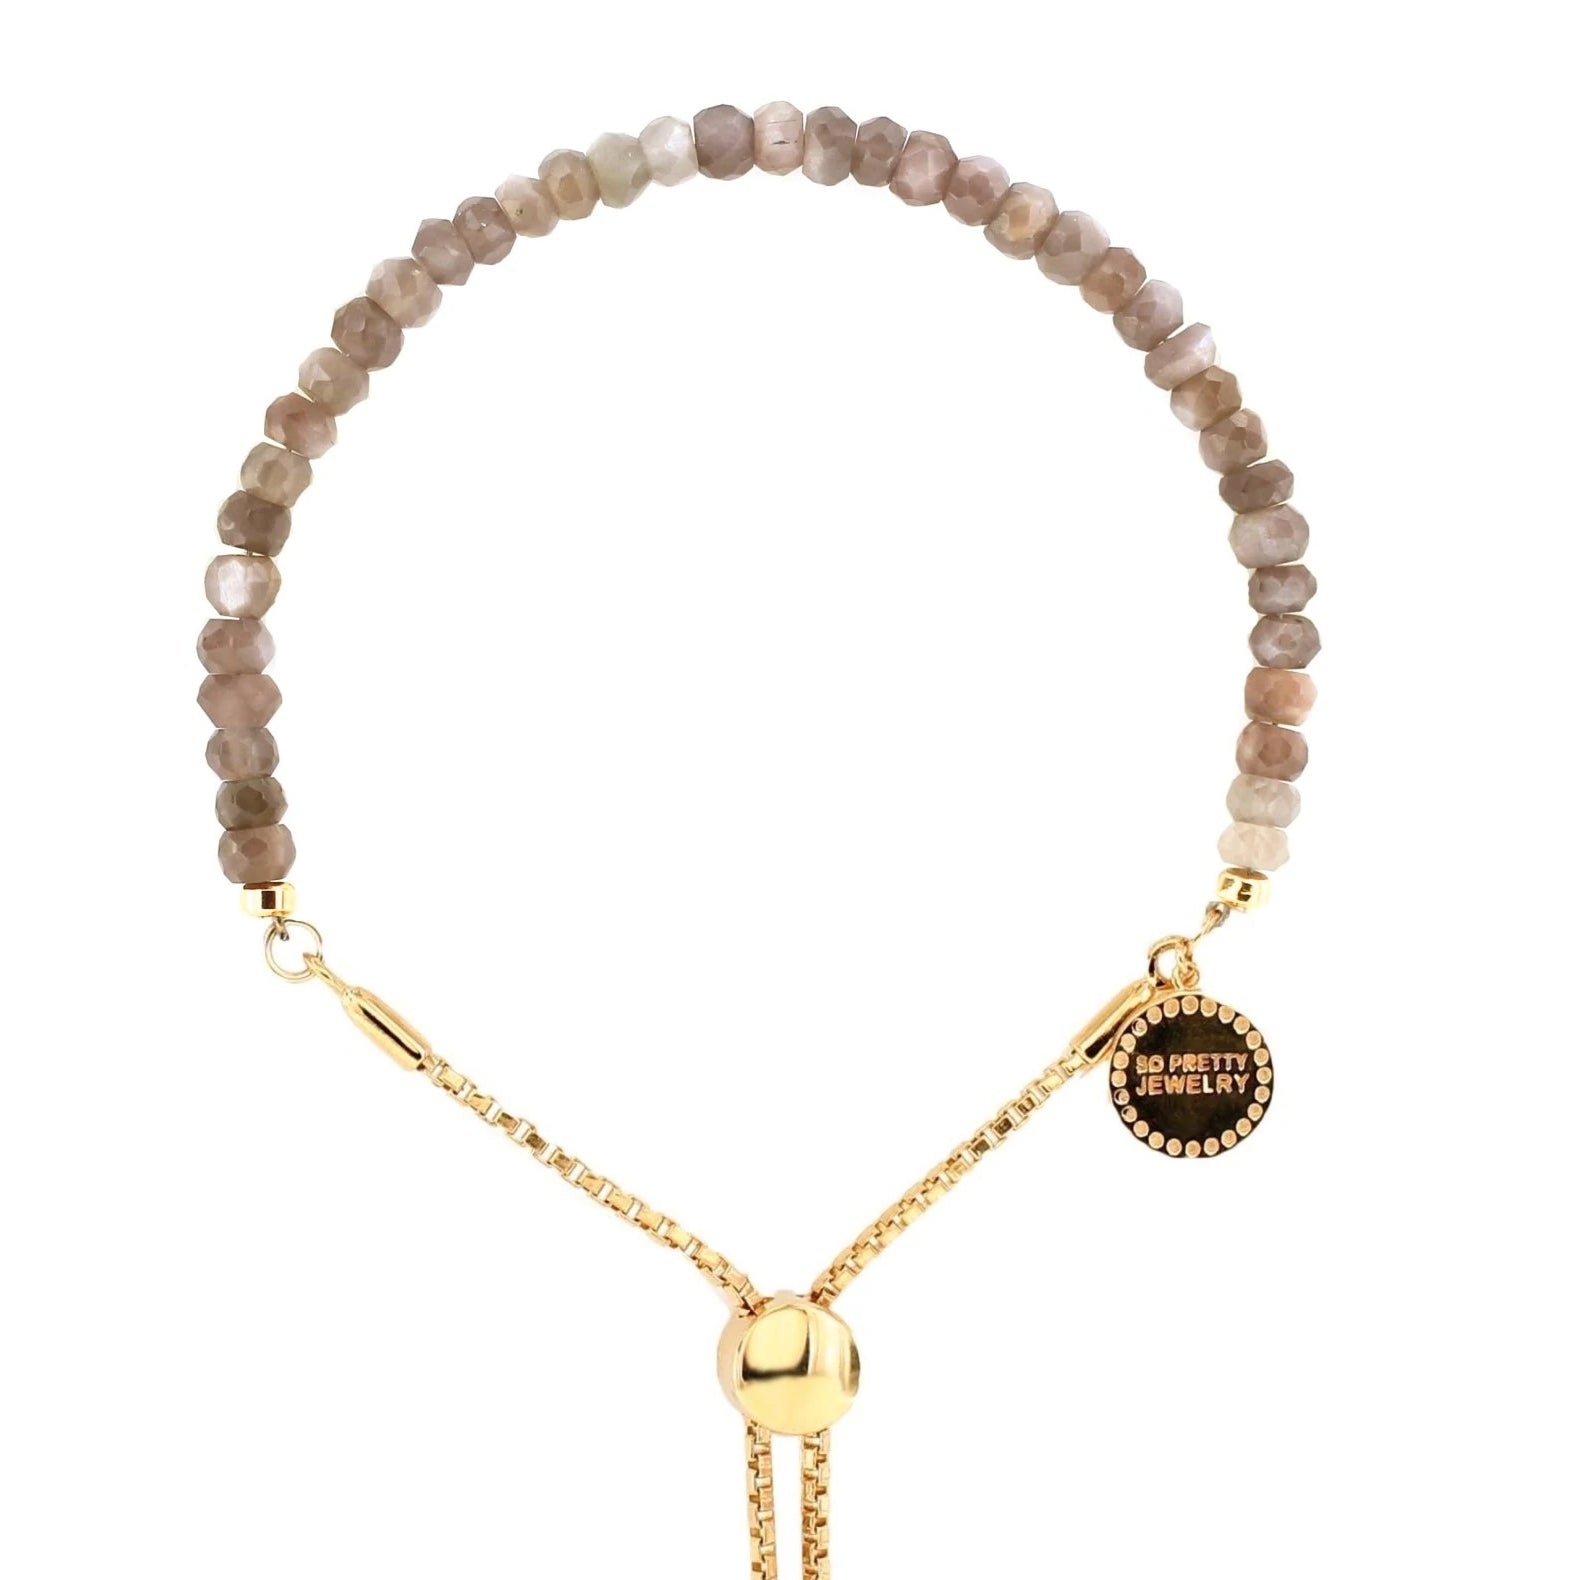 ICONIC ADJUSTABLE BRACELET - CHAI MOONSTONE & GOLD - SO PRETTY CARA COTTER